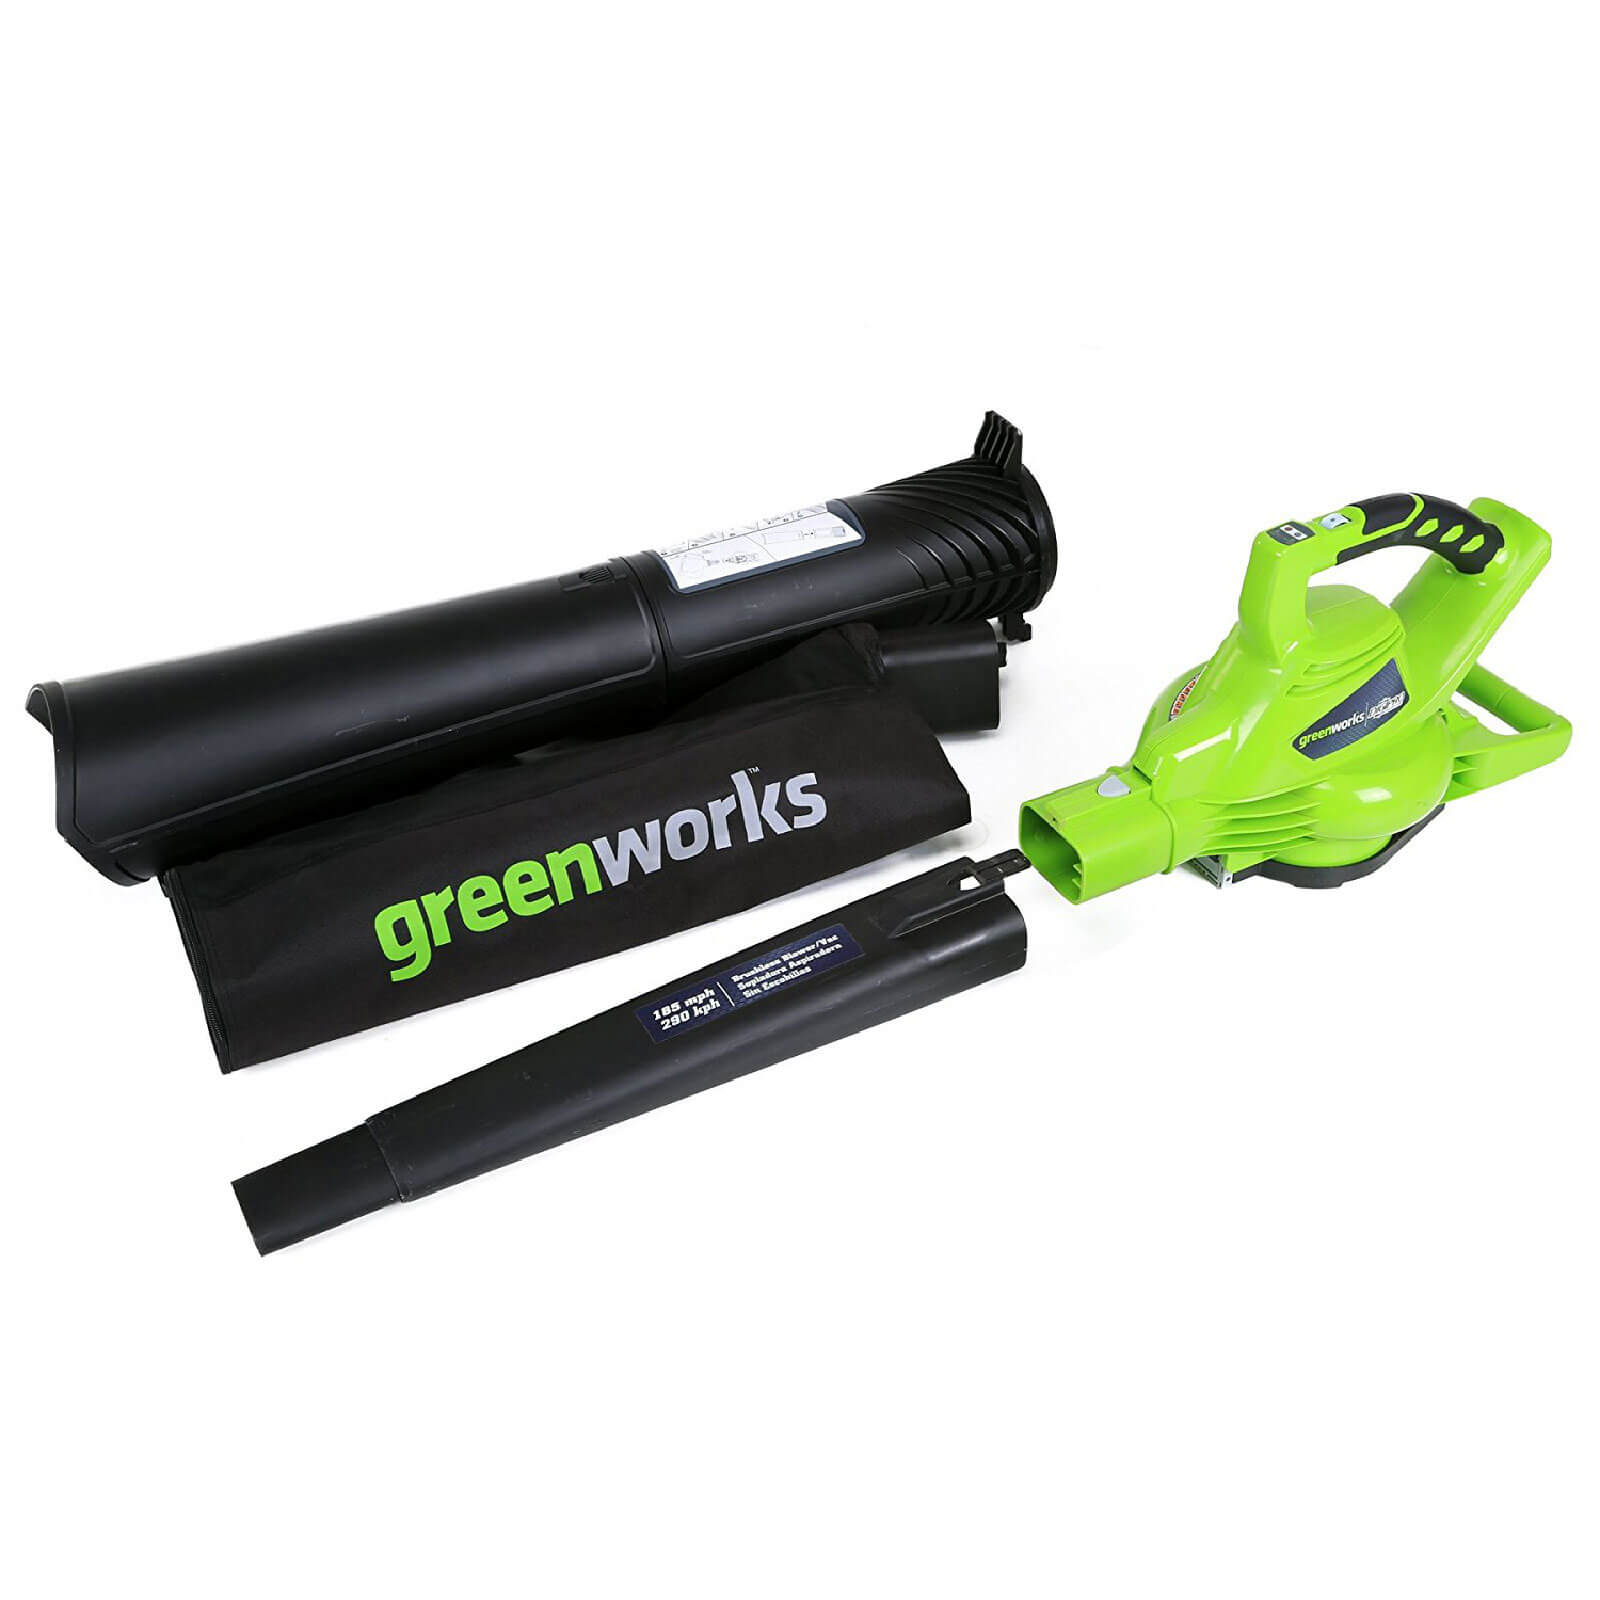 Greenworks 40V Cordless Garden Leaf Blower and Vacuum (tool only)